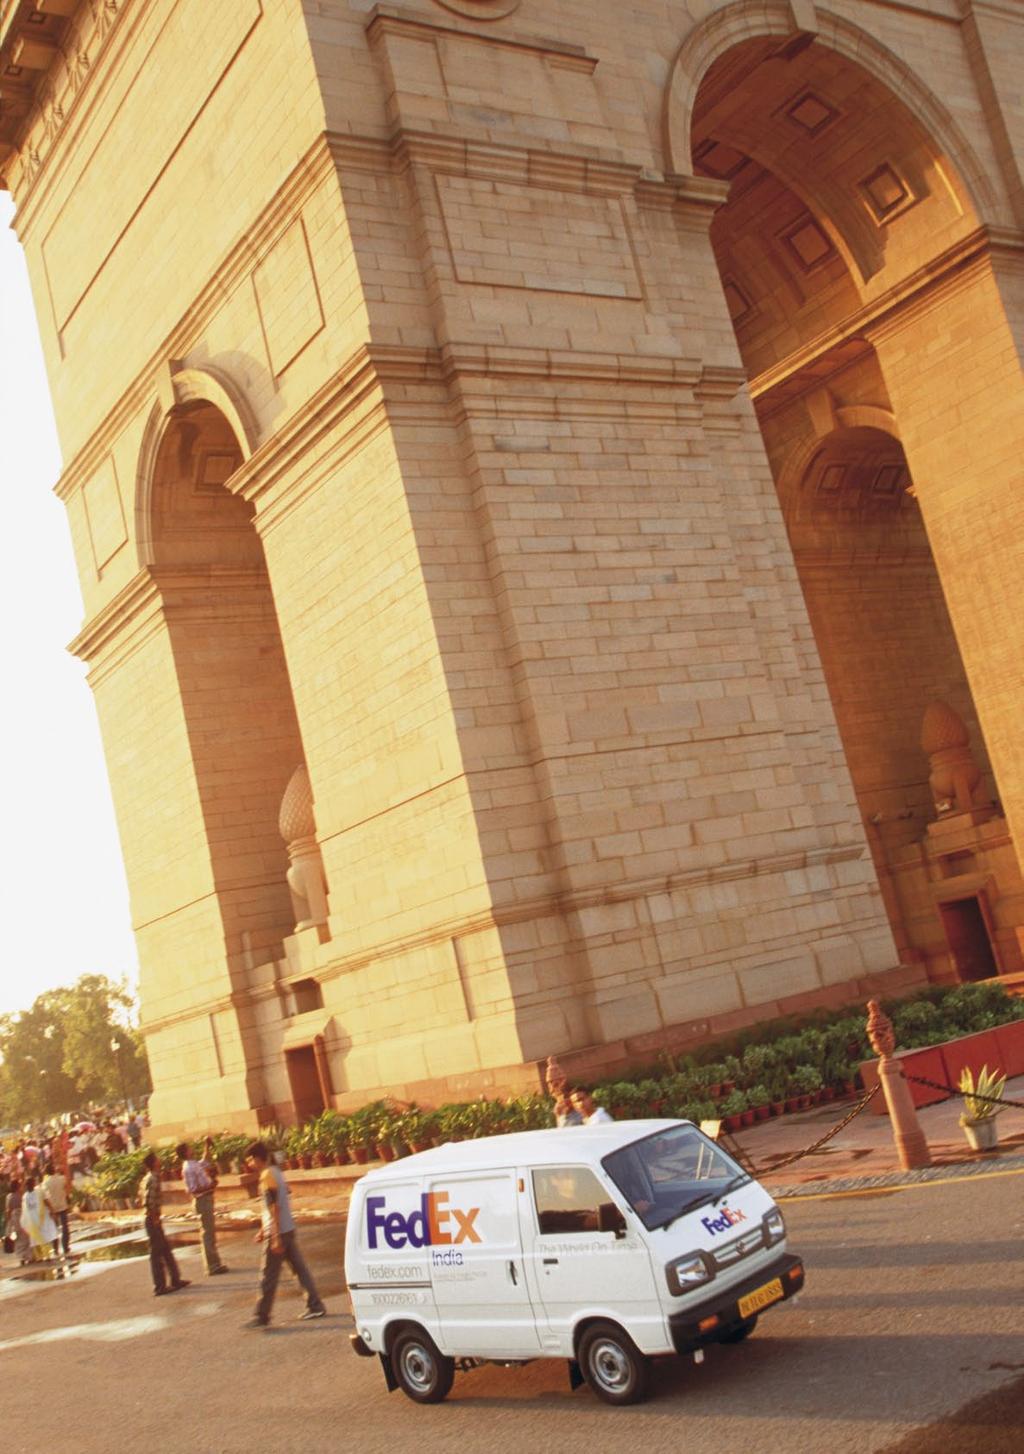 10 International FedEx Express Services from India FedEx has more than 13 years of experience in India, and is the country s leading express transportation company offering export and import service